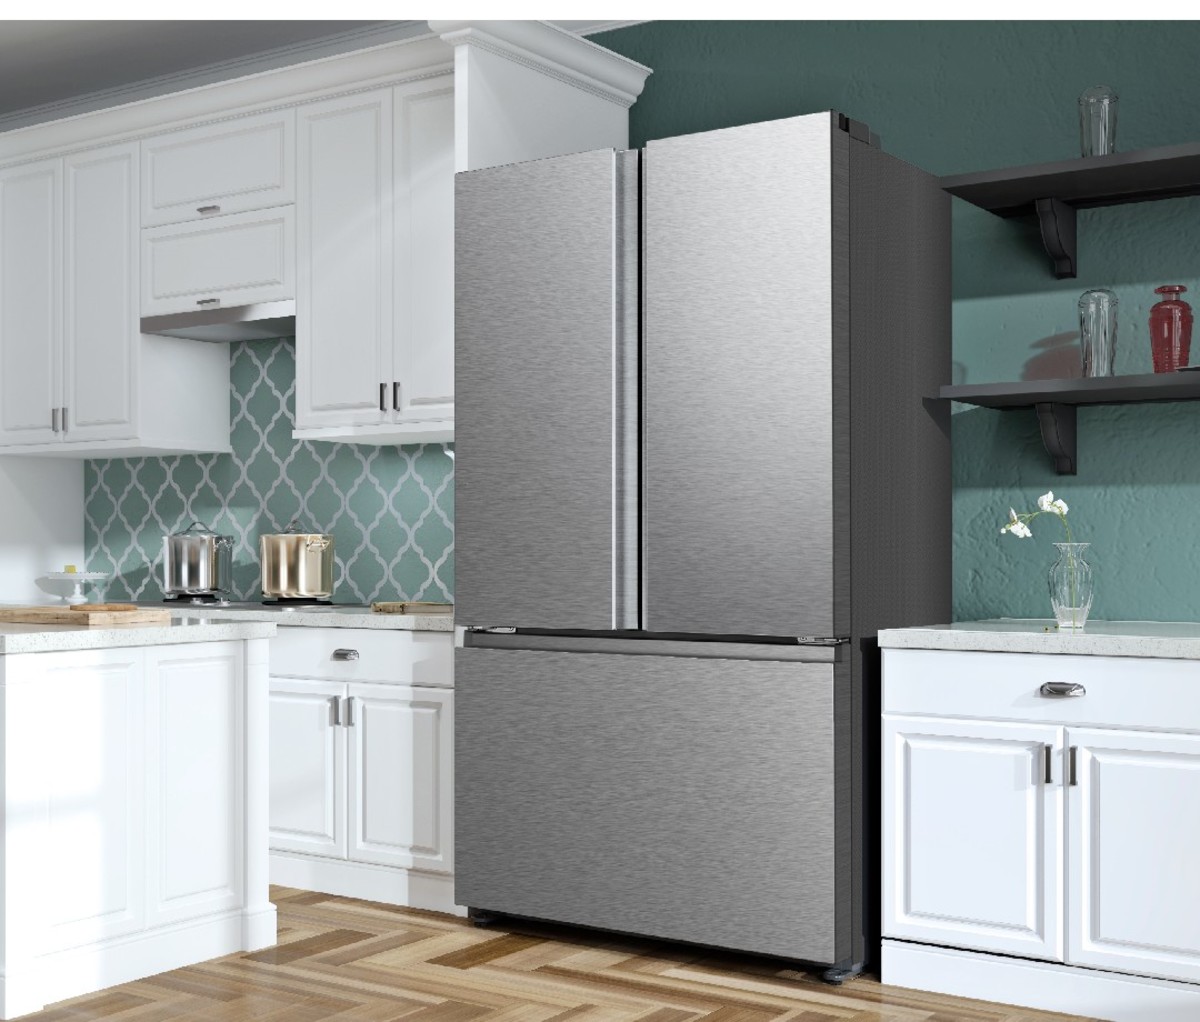 Gray brushed steel Hisense 26.6 Cu. Ft. French Door Refrigerator in a finished kitchen